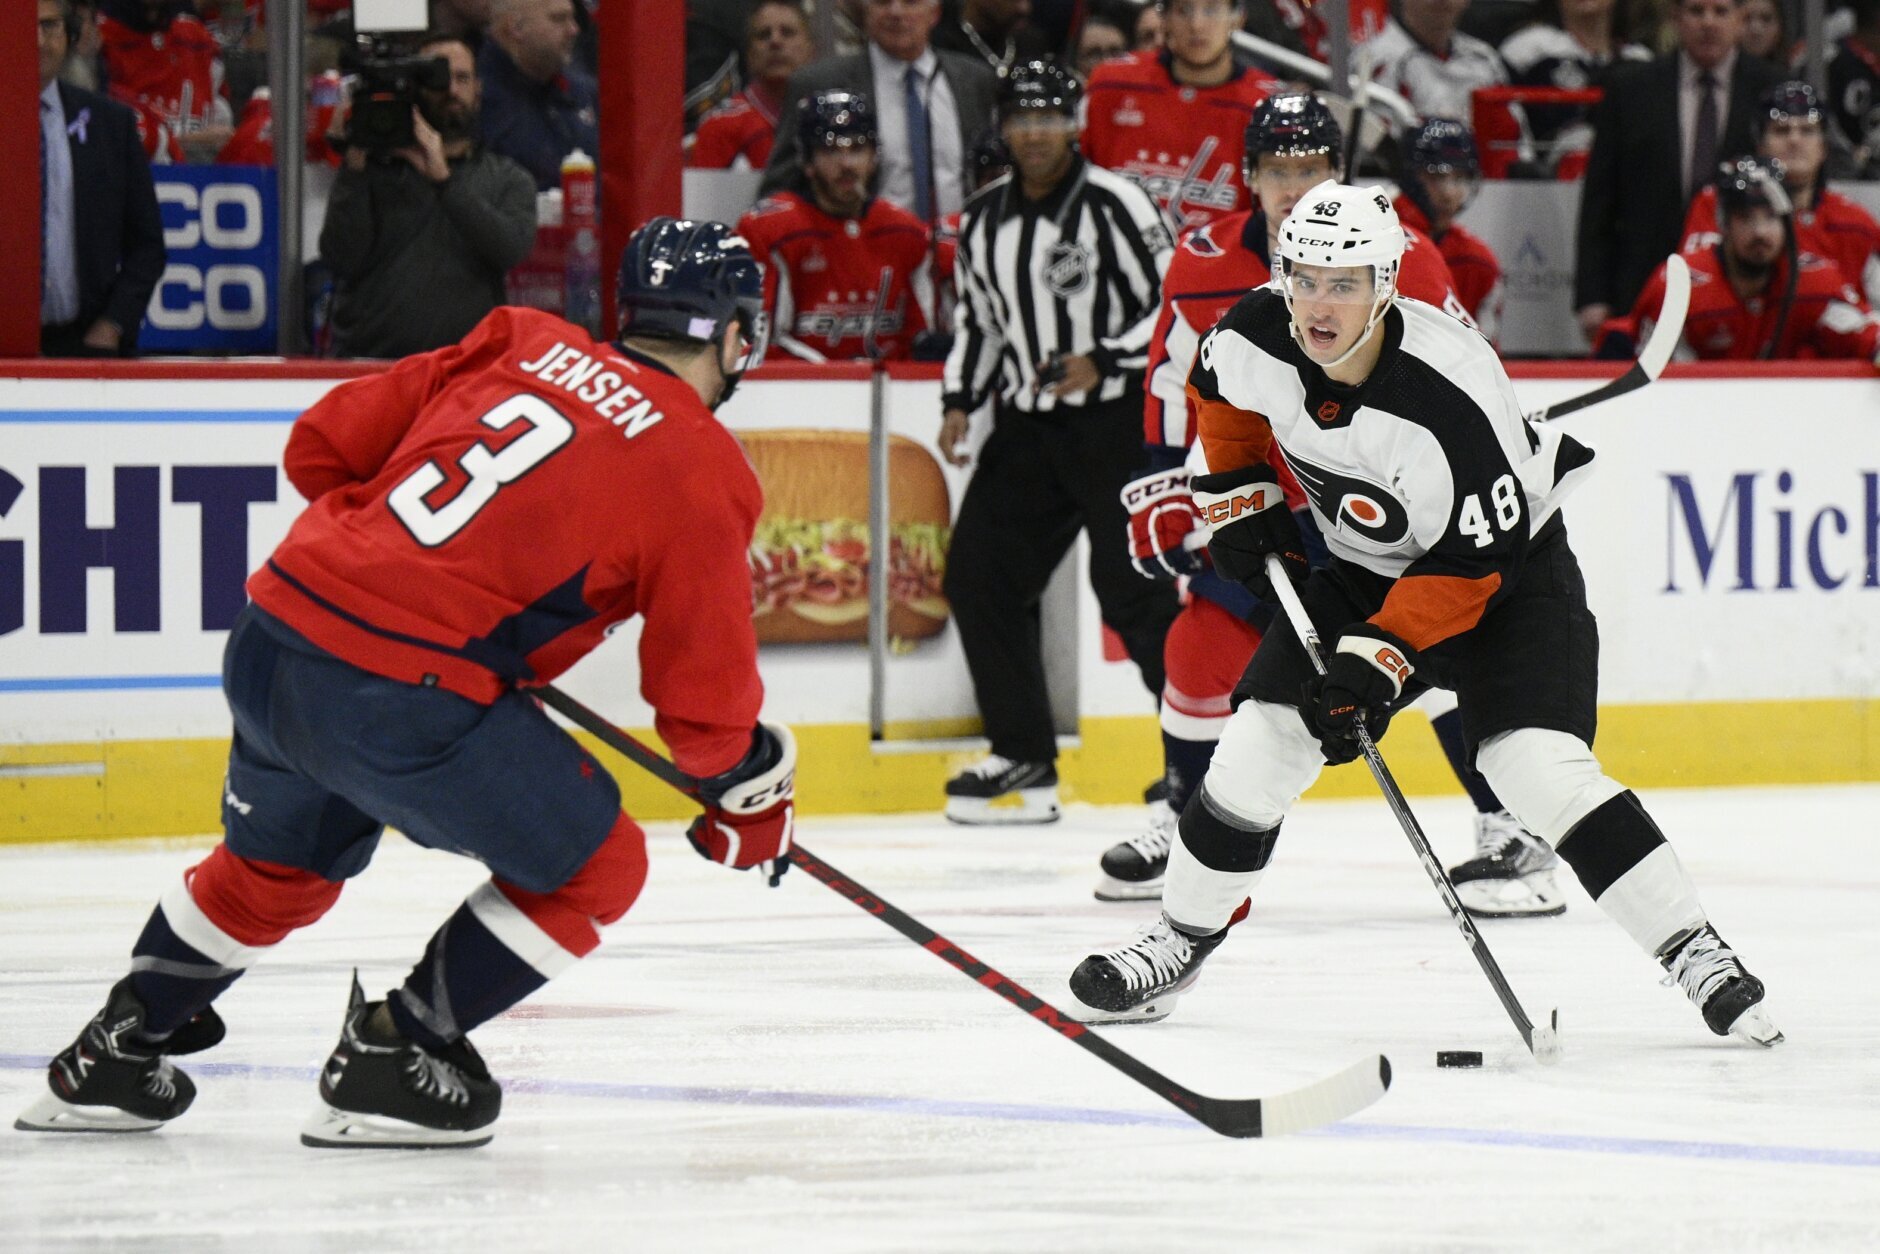 Flyers preview: Alex Ovechkin and the Capitals, rematch with